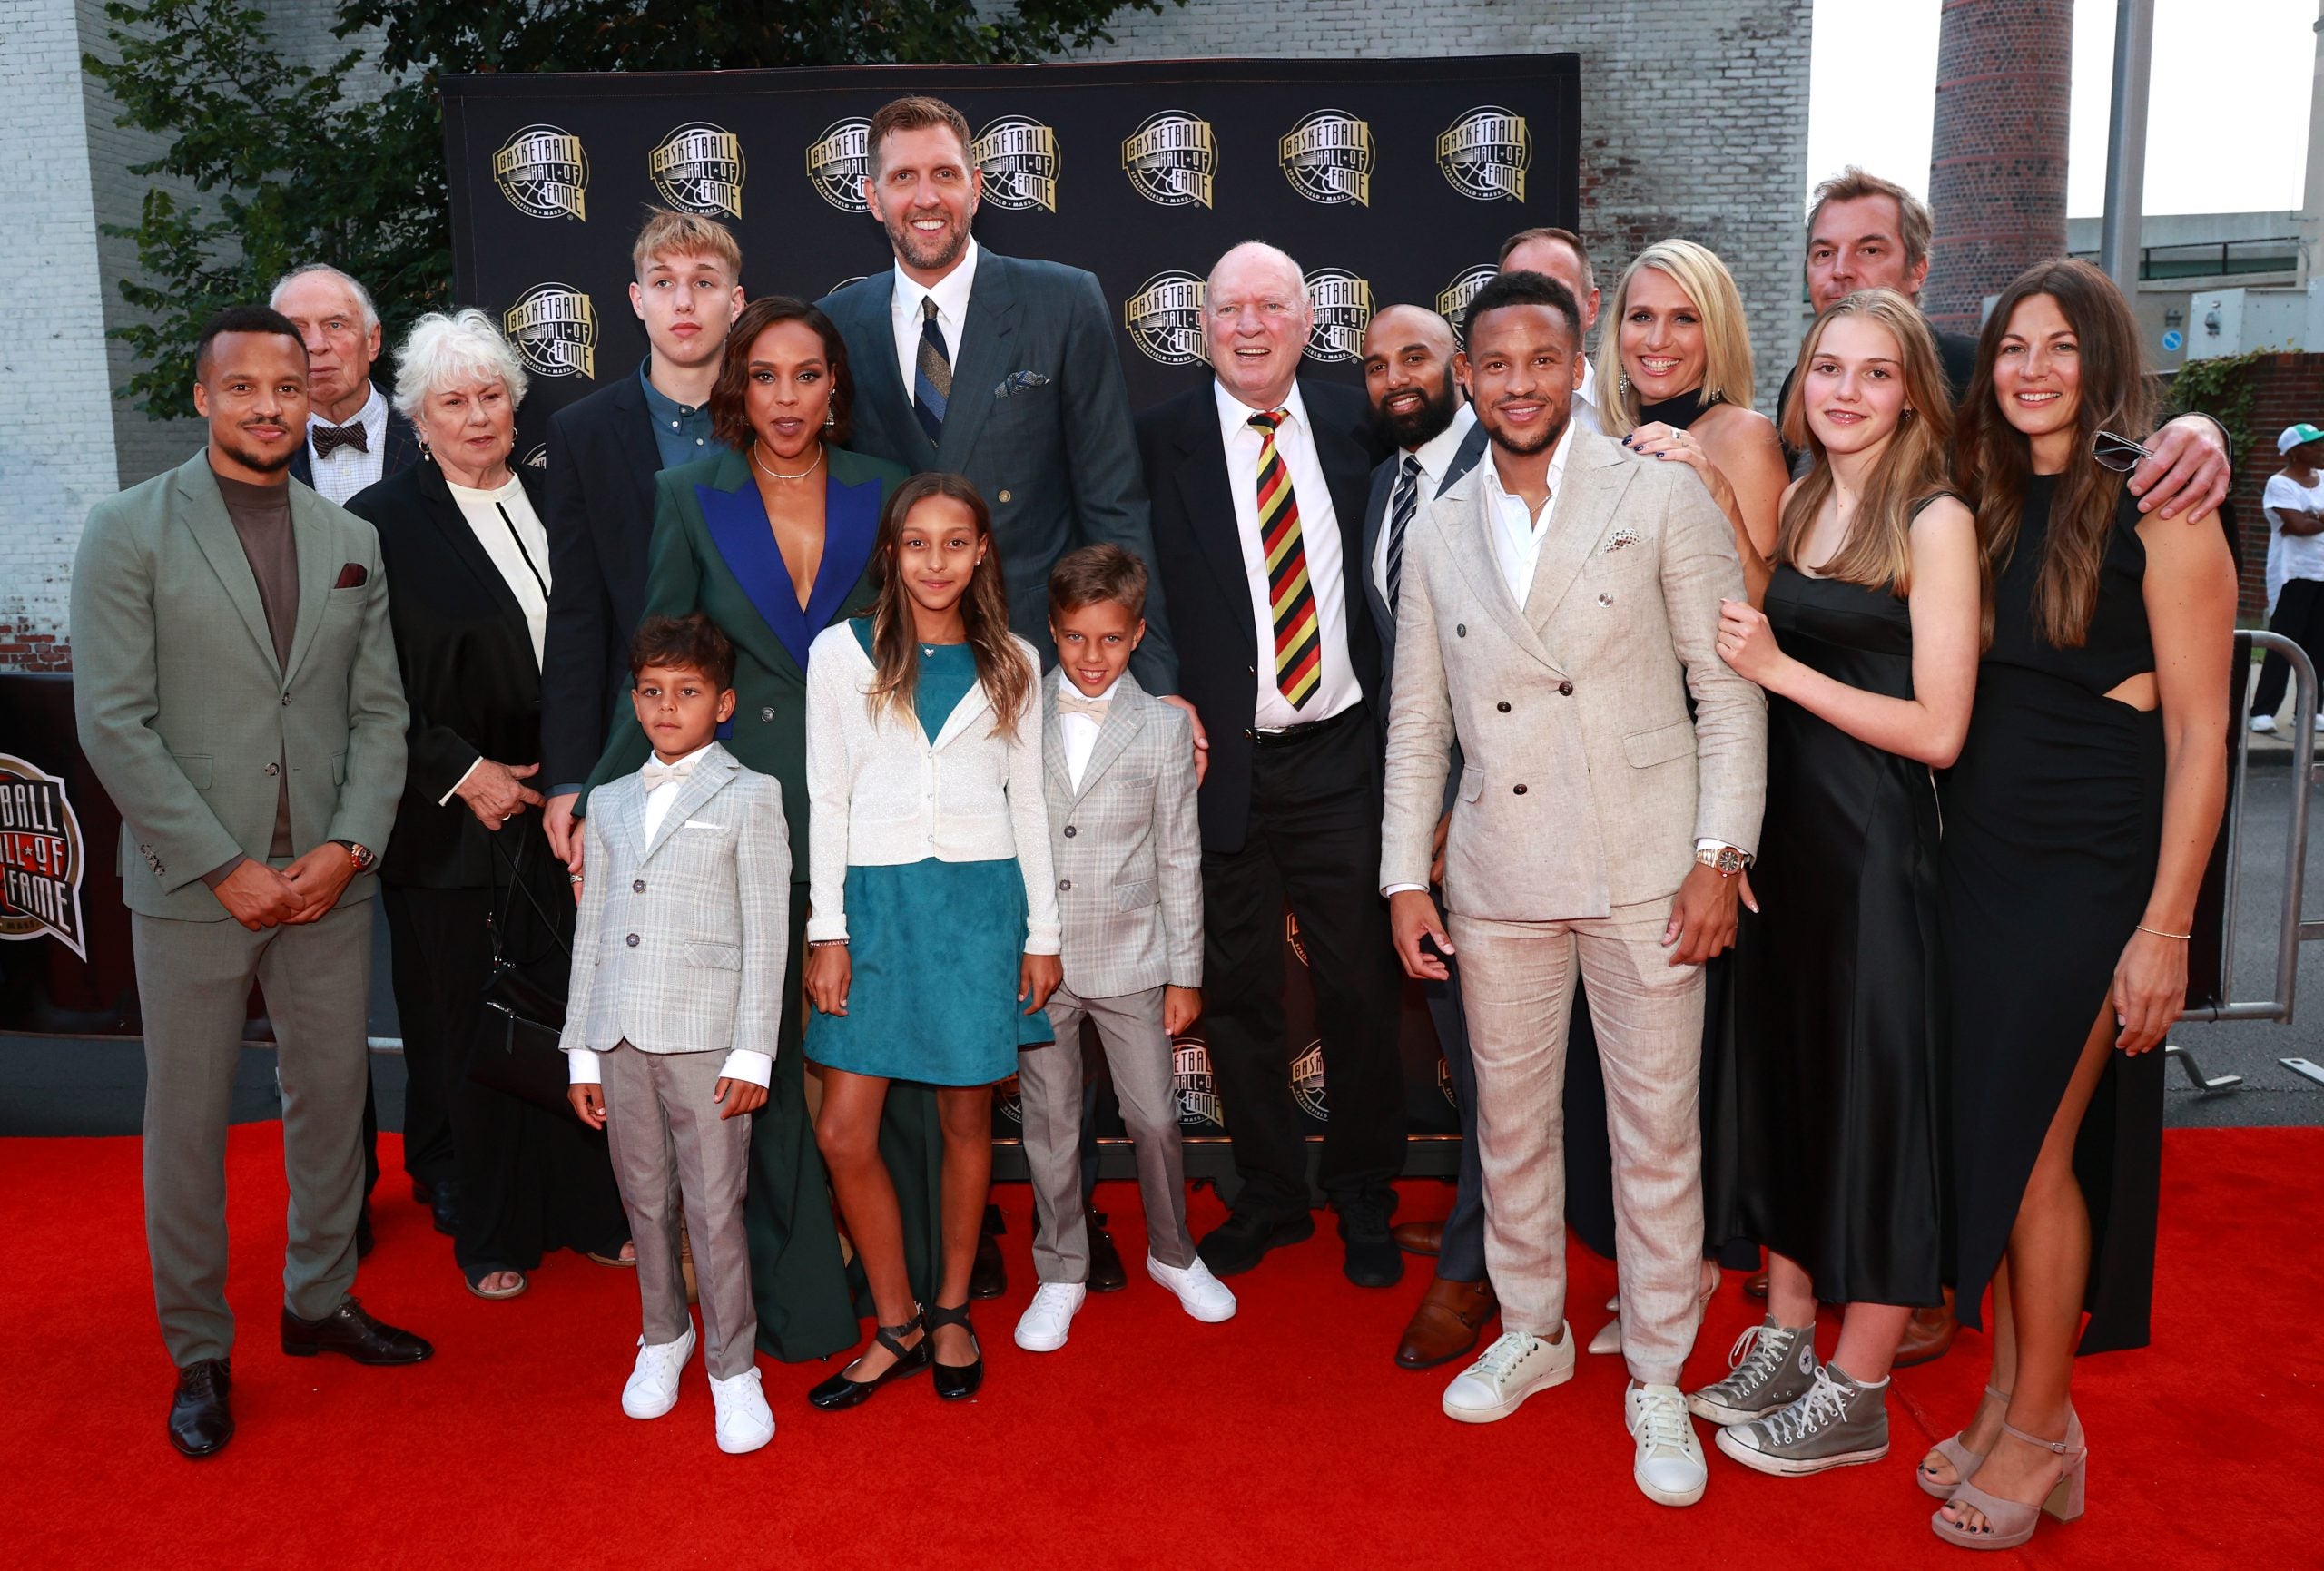 NBA Greats Dwyane Wade, Dirk Nowitzki Made Their Hall Of Fame Induction A Family Affair